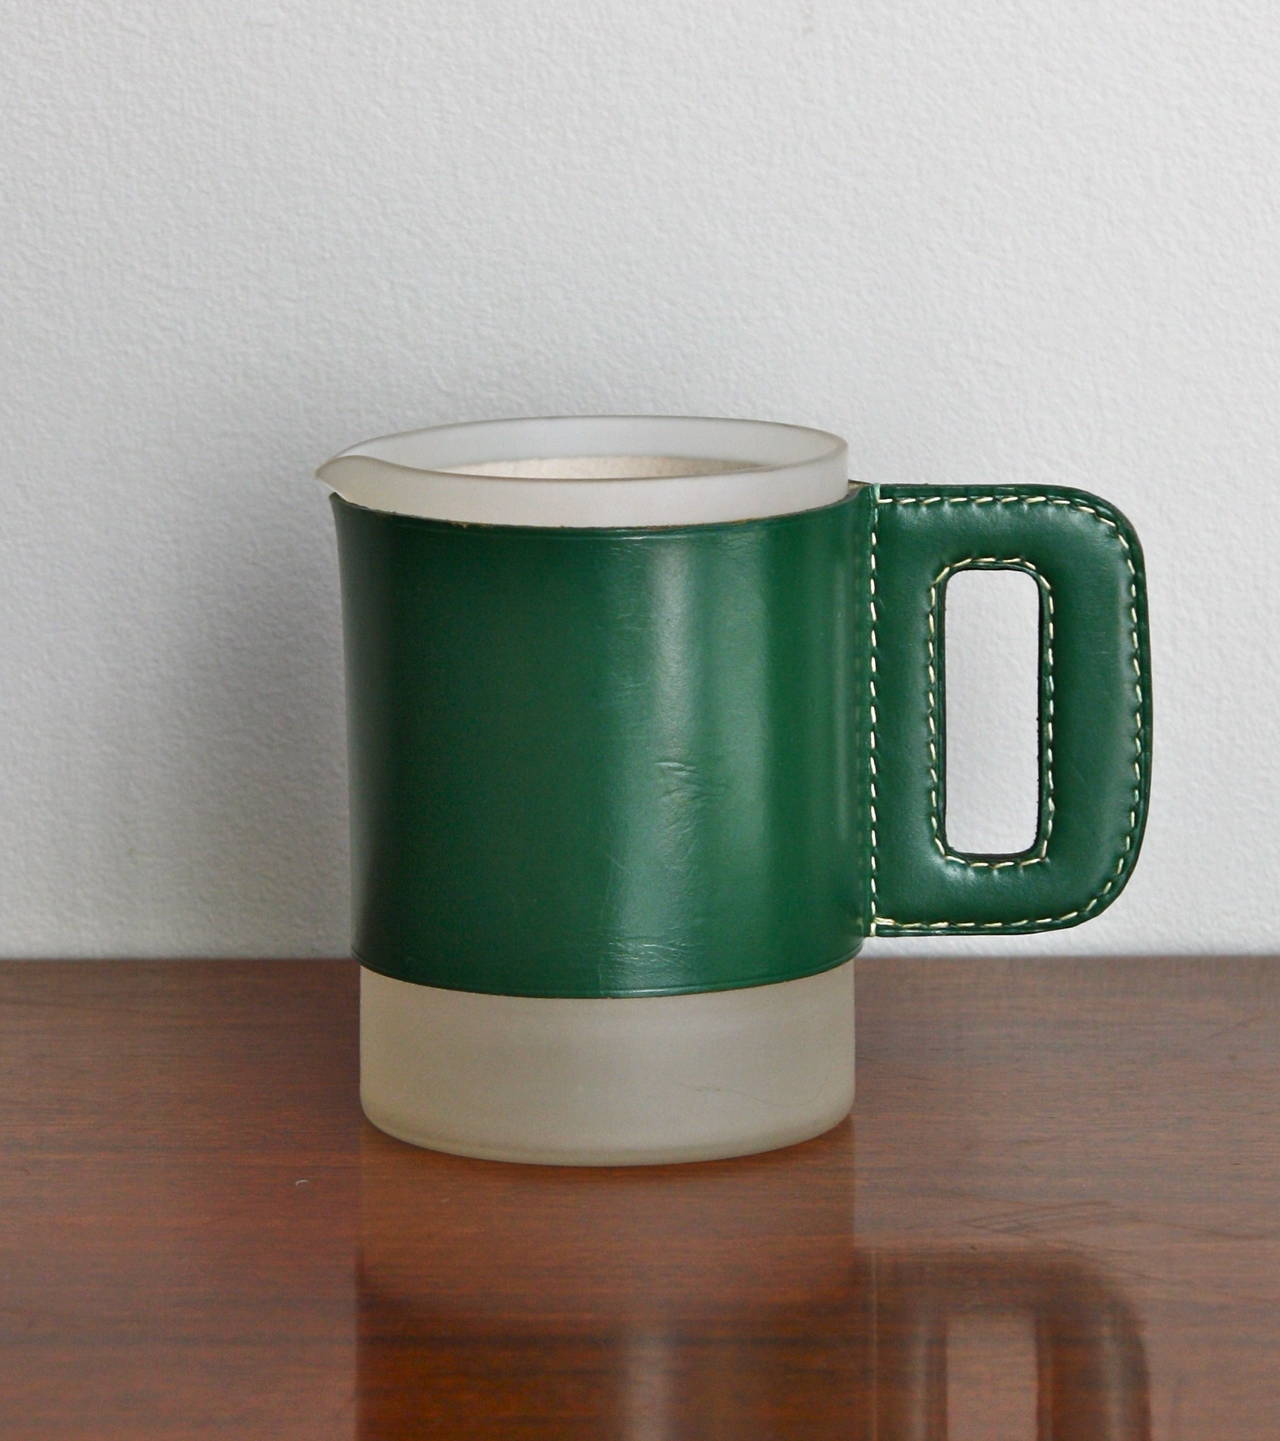 A strong and elegant pitcher by Carl Auböck. A lovely deep green hand-stitched leather covered over an opaque glass lipped beaker. A great example of how Werkstätte Carl Auböck can create lovely honest hand crafted objects. This version with the